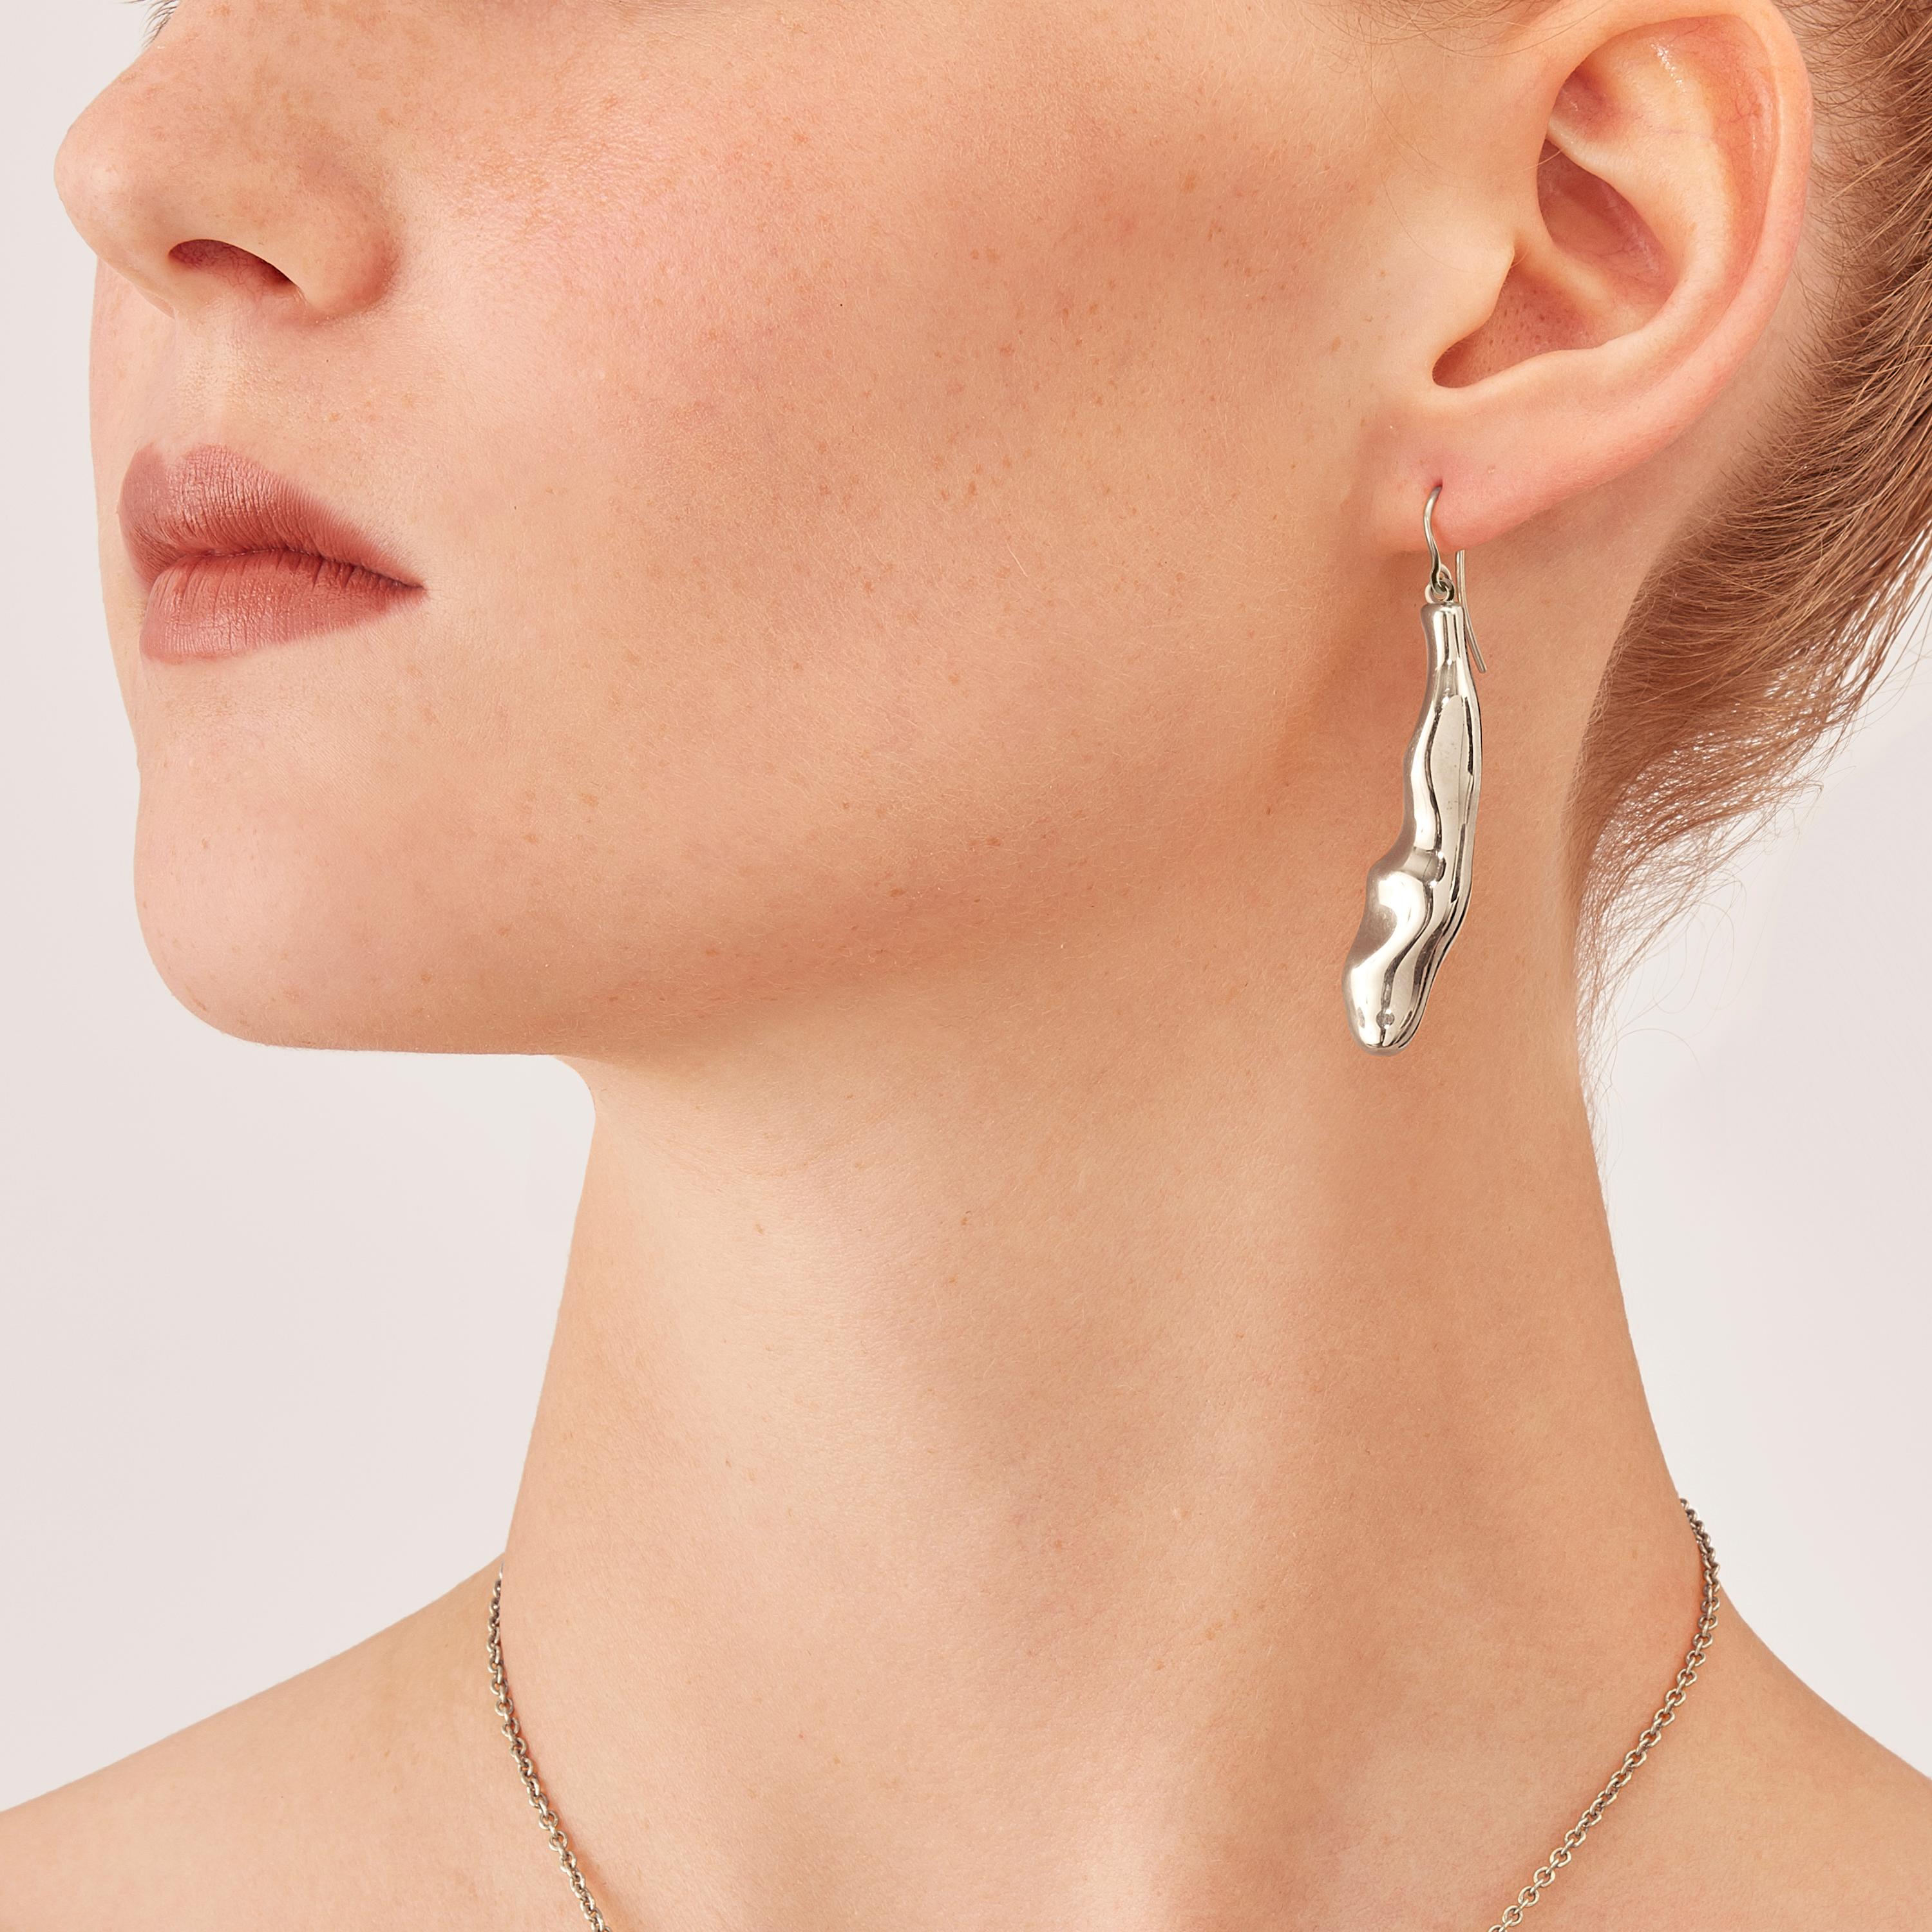 Made by hand in Nathalie Jean's Milan atelier in limited edition, Mercure Contemporary Drop Dangle Earrings are in rhodium plated sterling silver. Small, delicate, ebbing sculptures with seemingly random forms, these supple shapes are modulated in